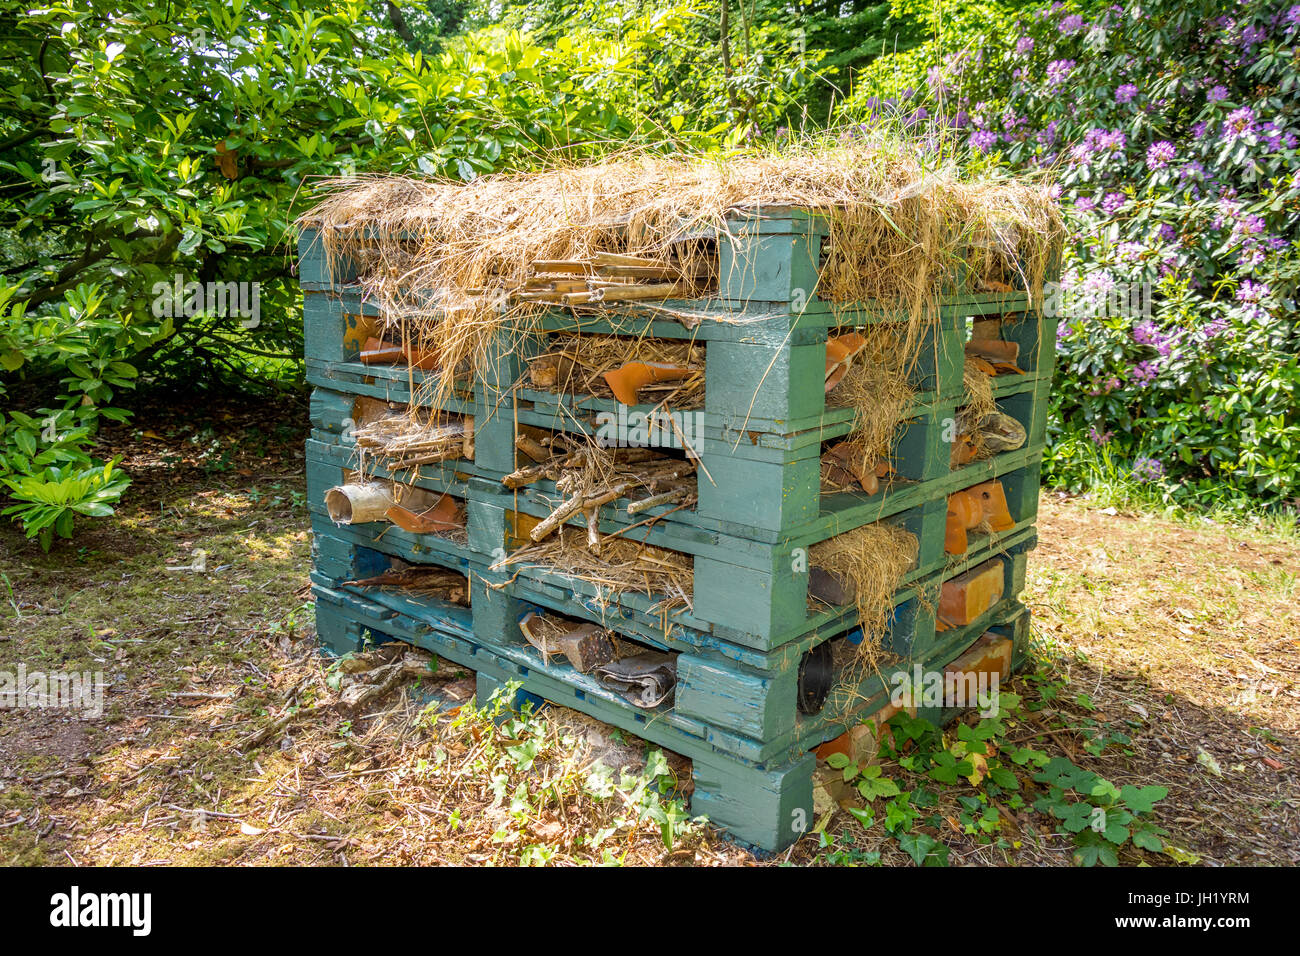 large bug hotel made from wooden pallets Stock Photo